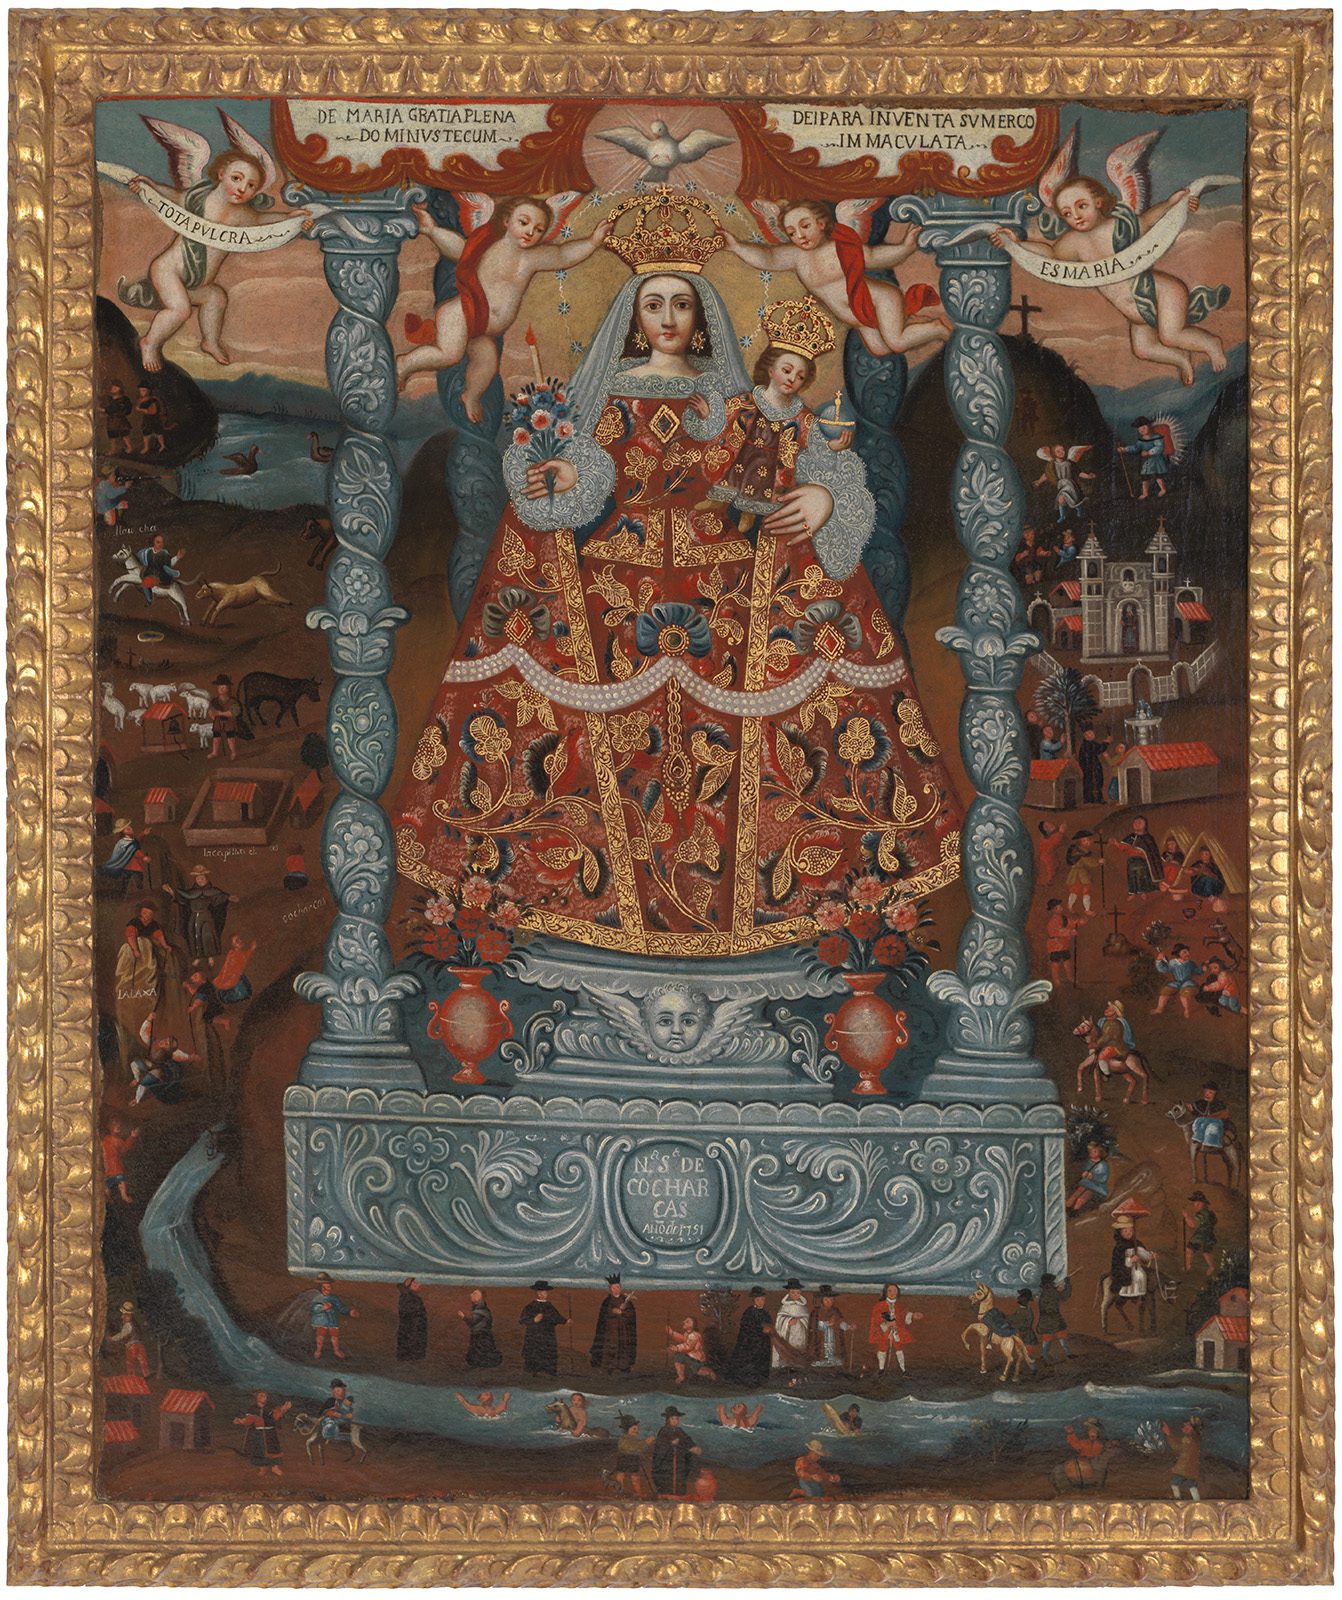 Oil painting with gold of a saintly woman and infant in crowns and formal dress surrounded by angels, smaller figures, and animals